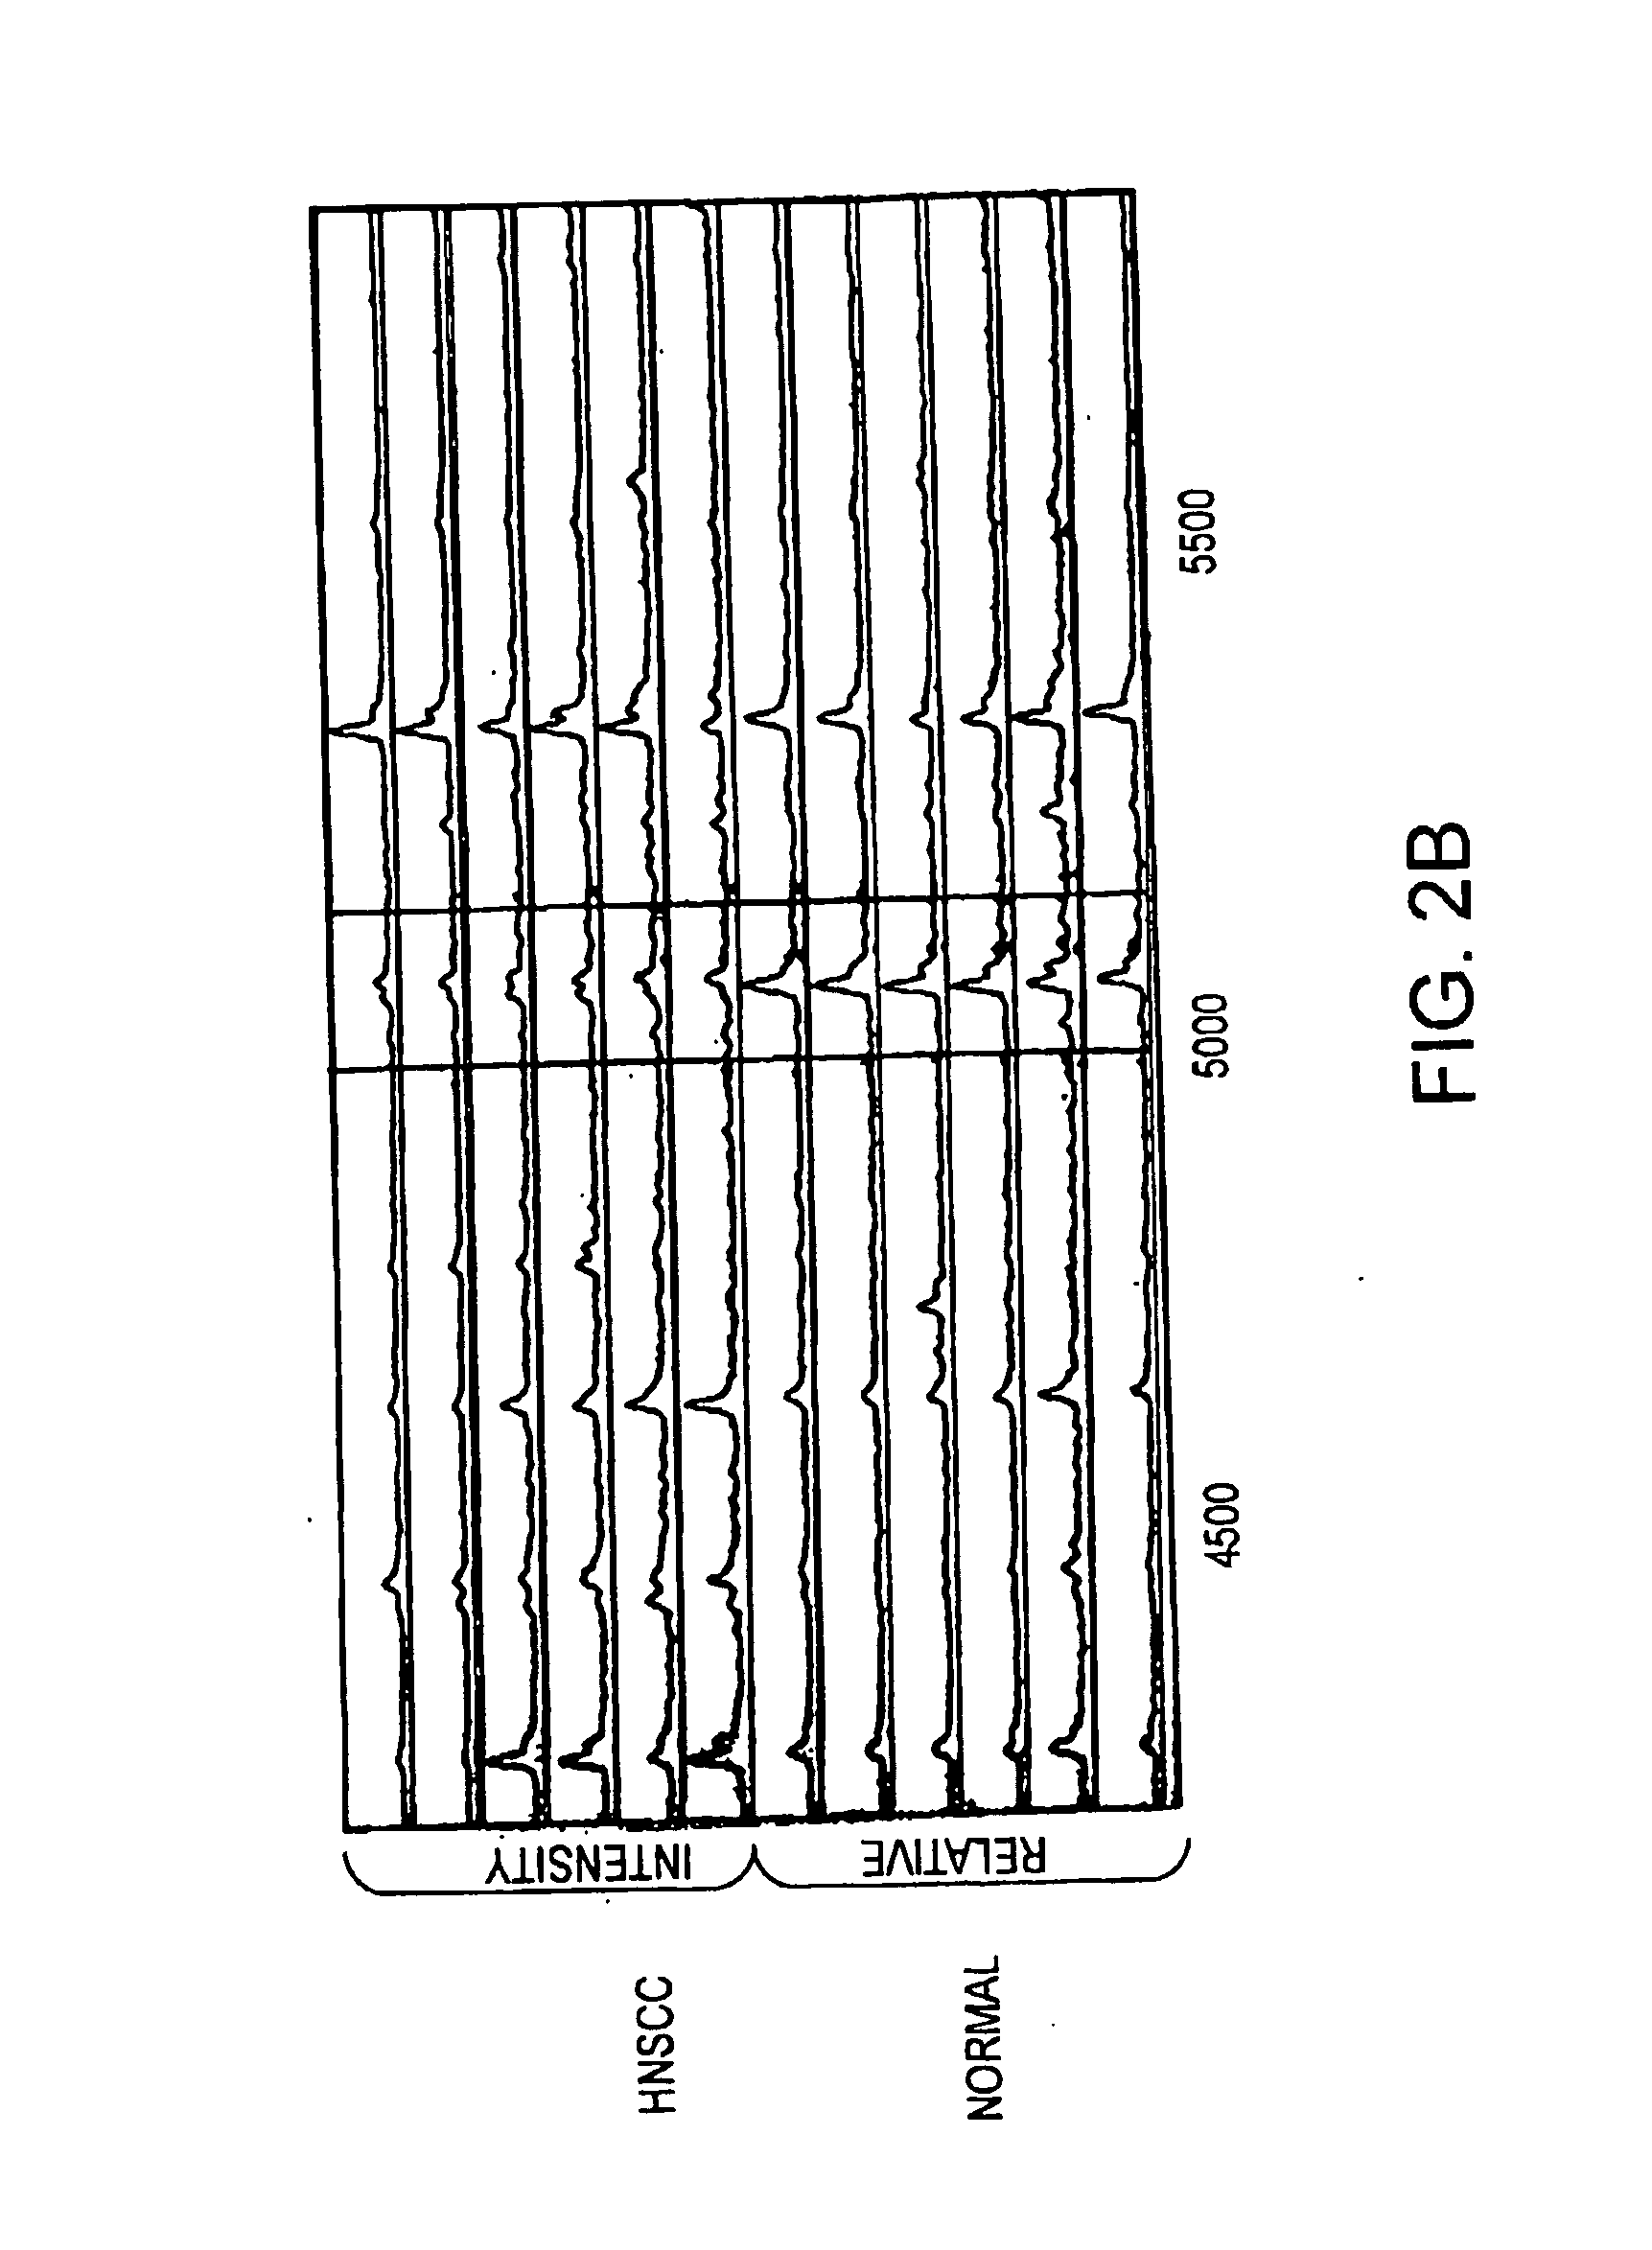 Method for diagnosing head and neck squamous cell carcinoma